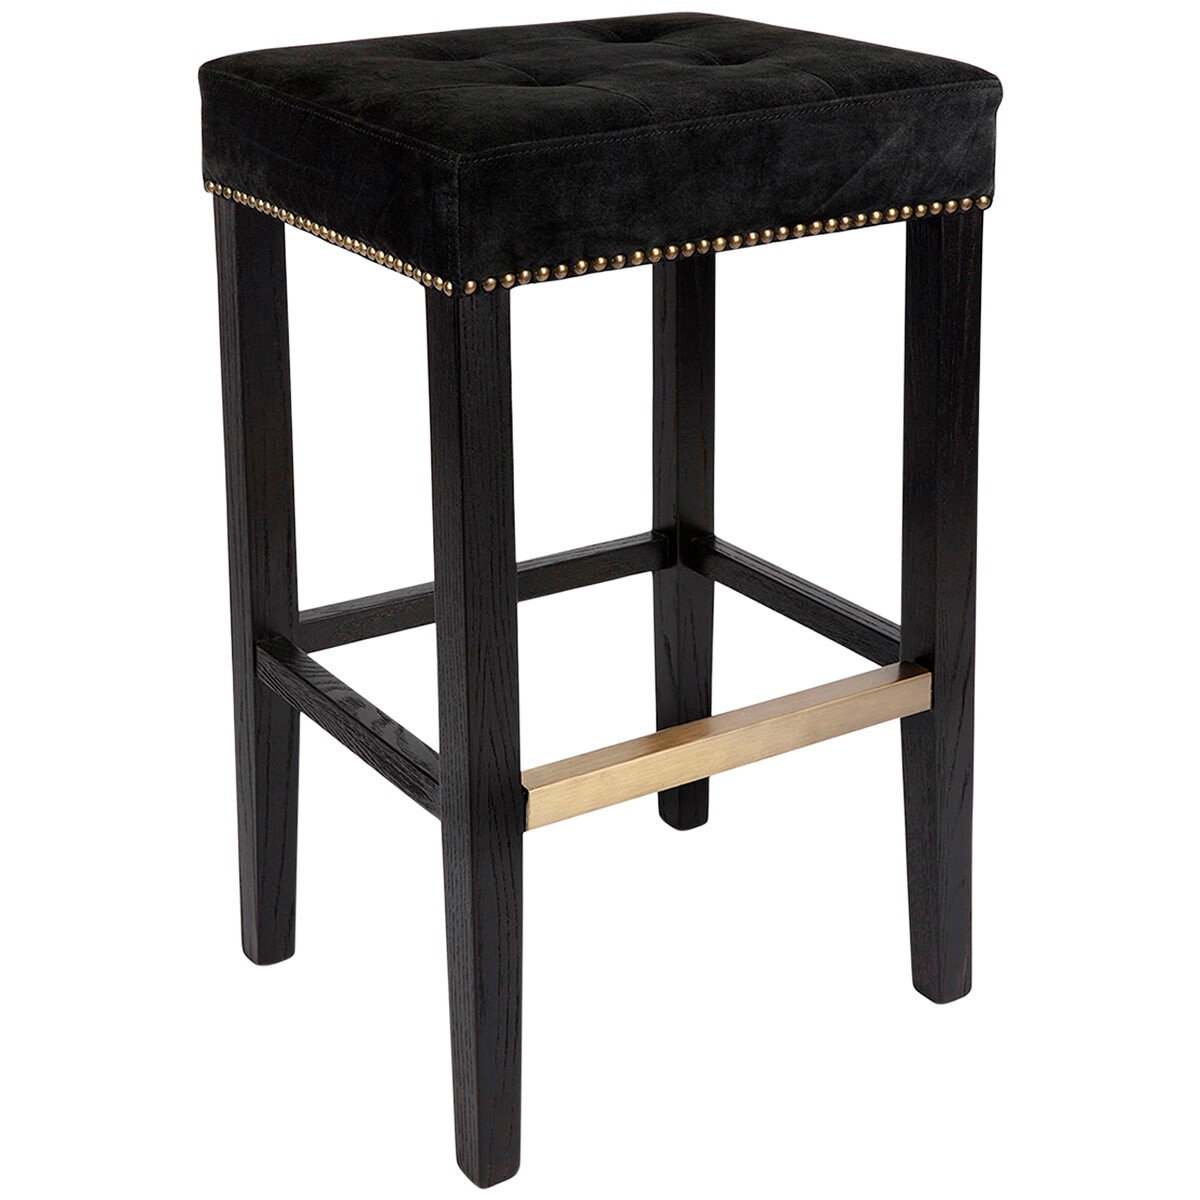 Cafe Lighting and Living Canyon Black Bar Stool Black Suede